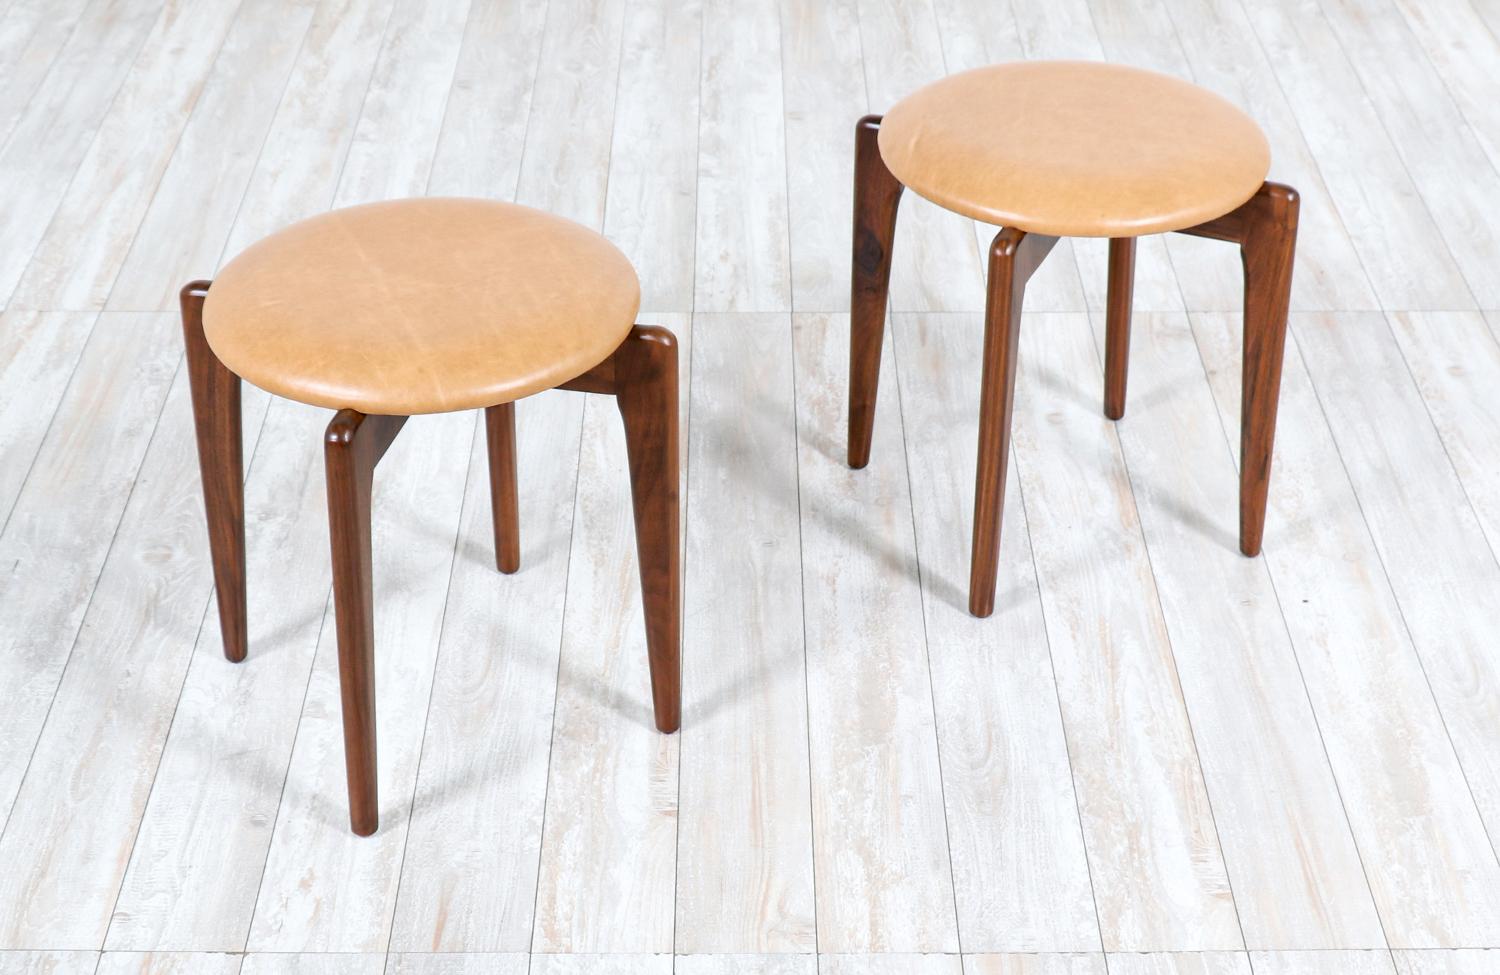 Mid-Century Modern Adrian Pearsall Sculpted Walnut & Leather Stools for Craft Associates